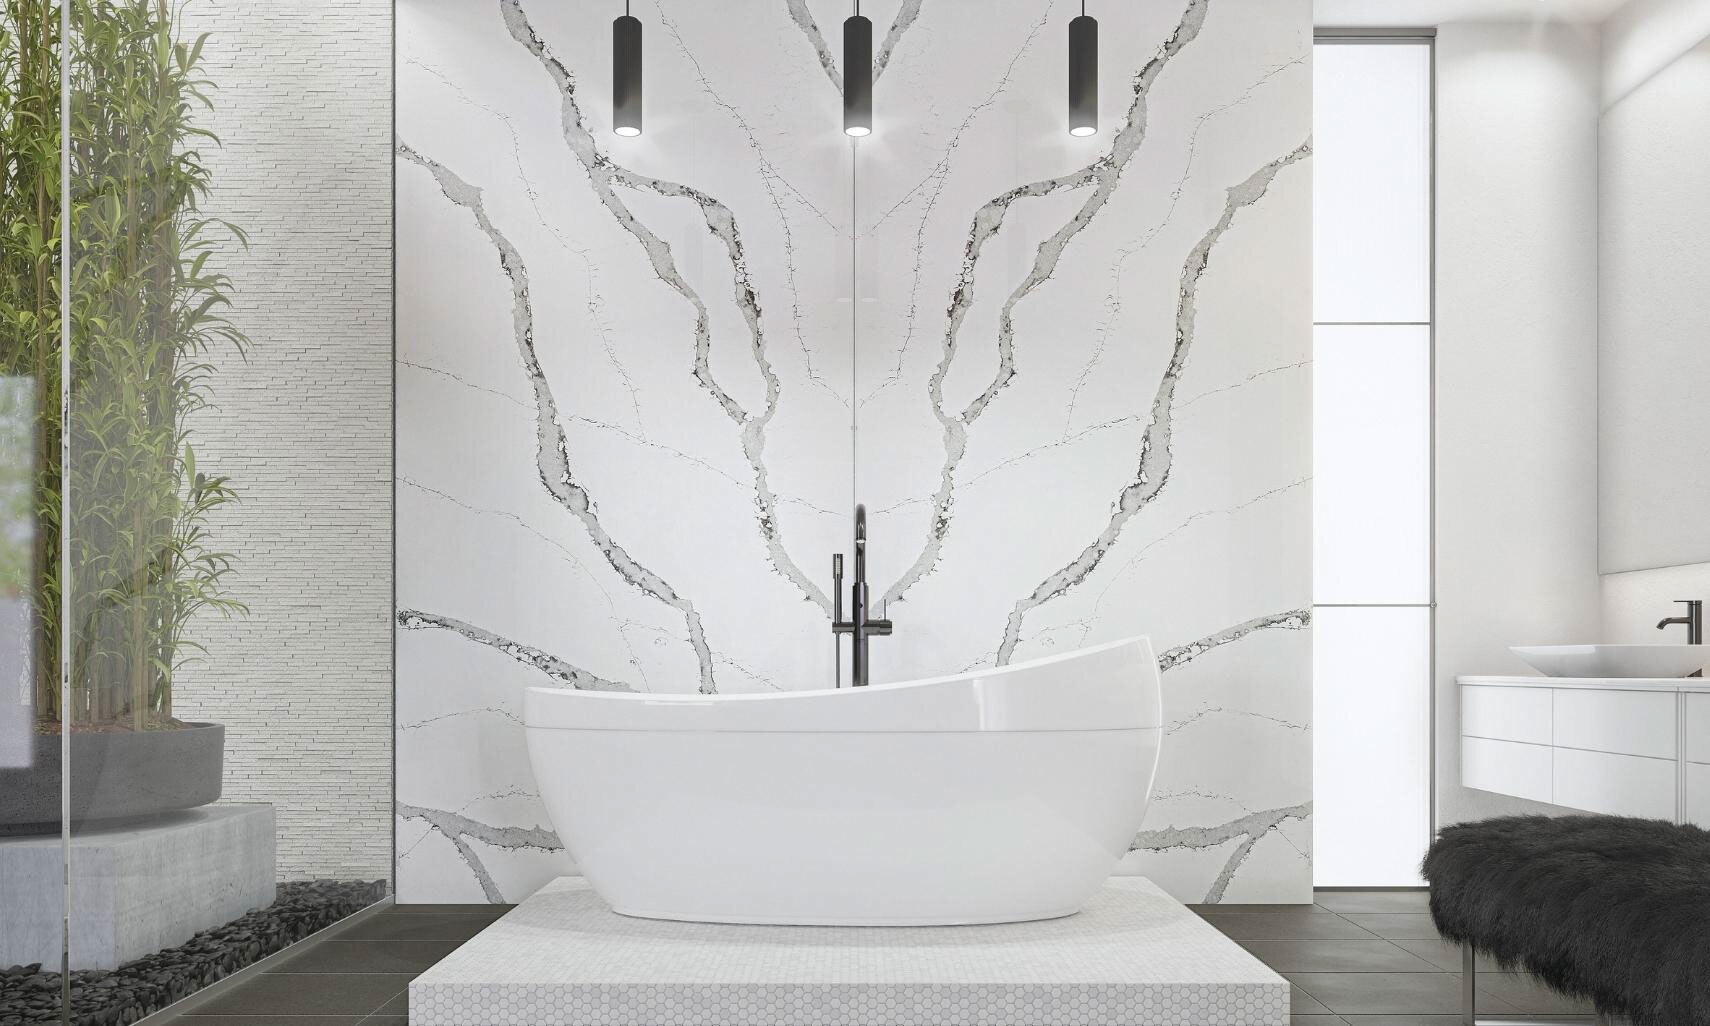 Modern bathroom décor with pendants over a soaker tub on a white pedestal, in front of white & gray book-matched quartz slab wall that looks like marble.